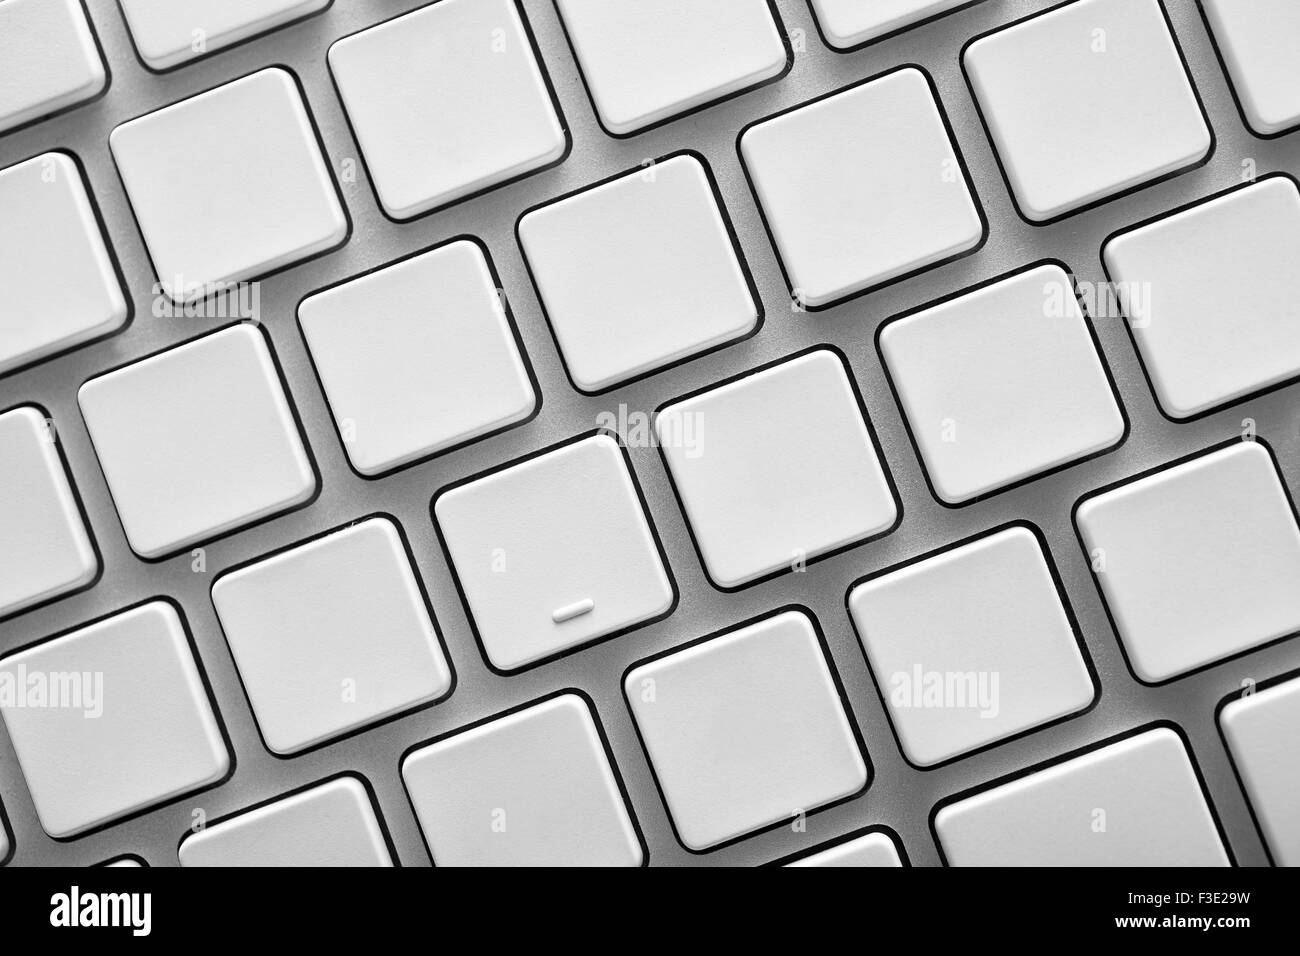 Computer keyboard with blank keys for your own idea. Stock Photo